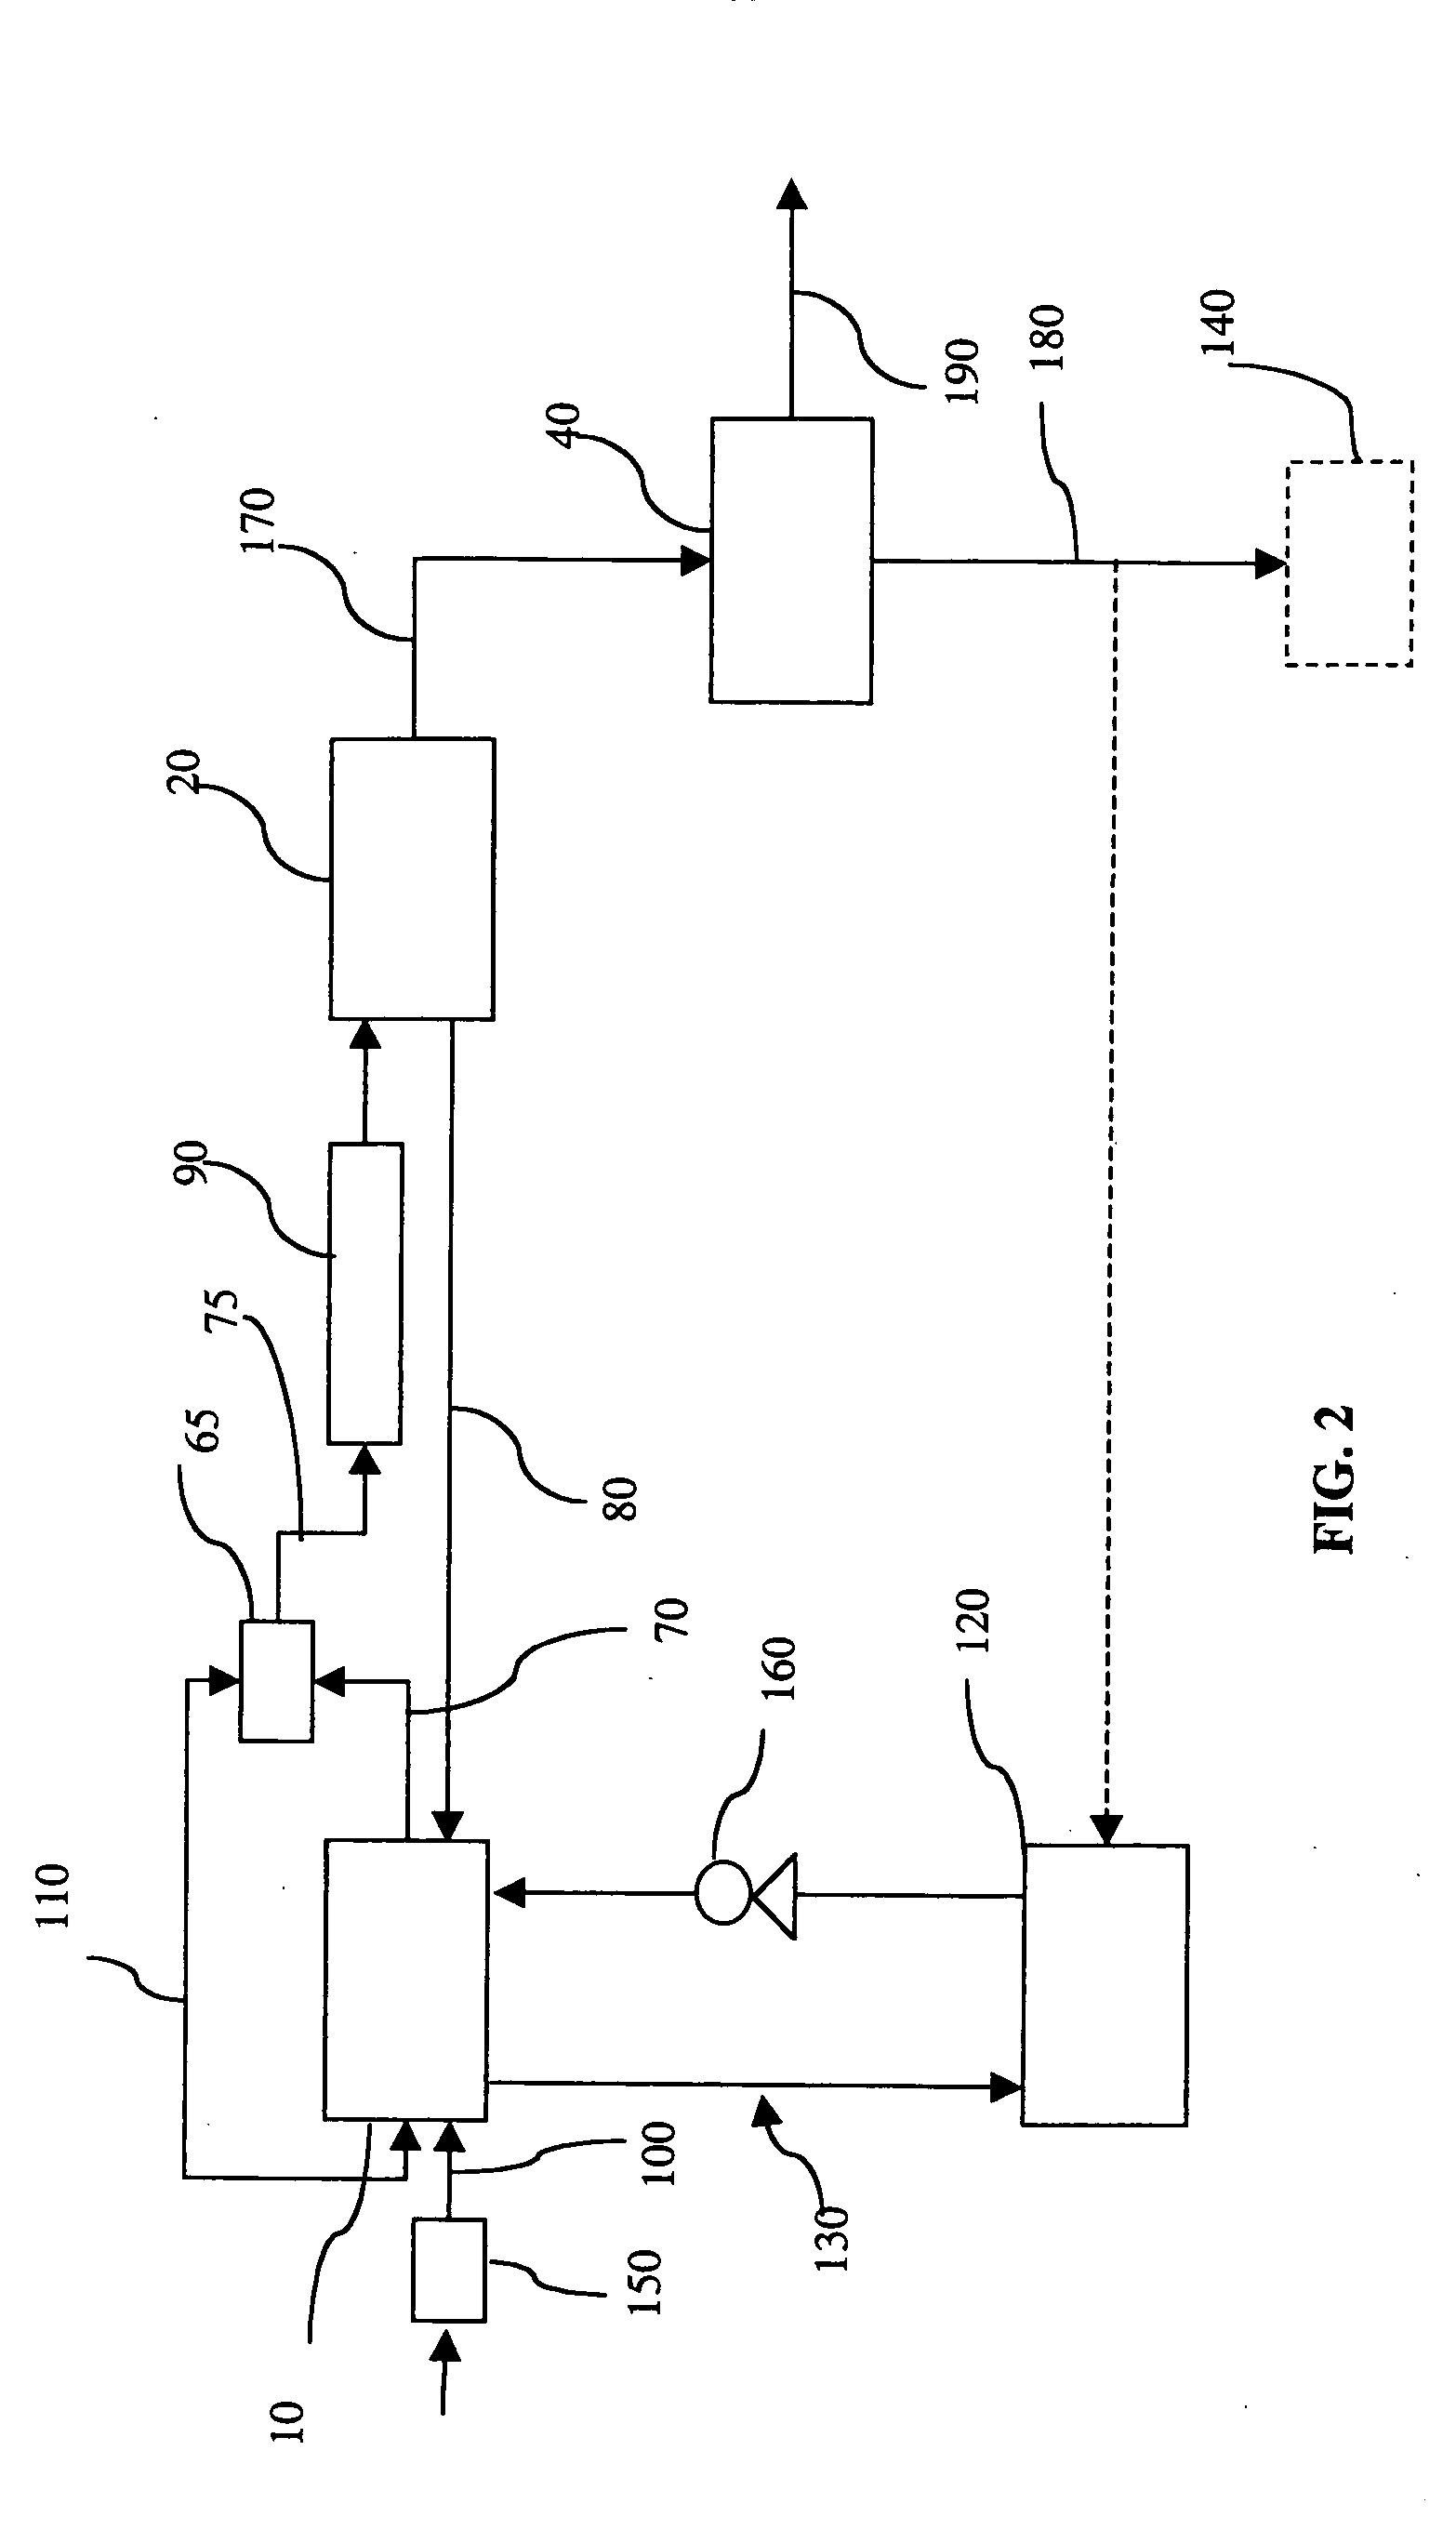 Hydrogen production and water recovery system for a fuel cell